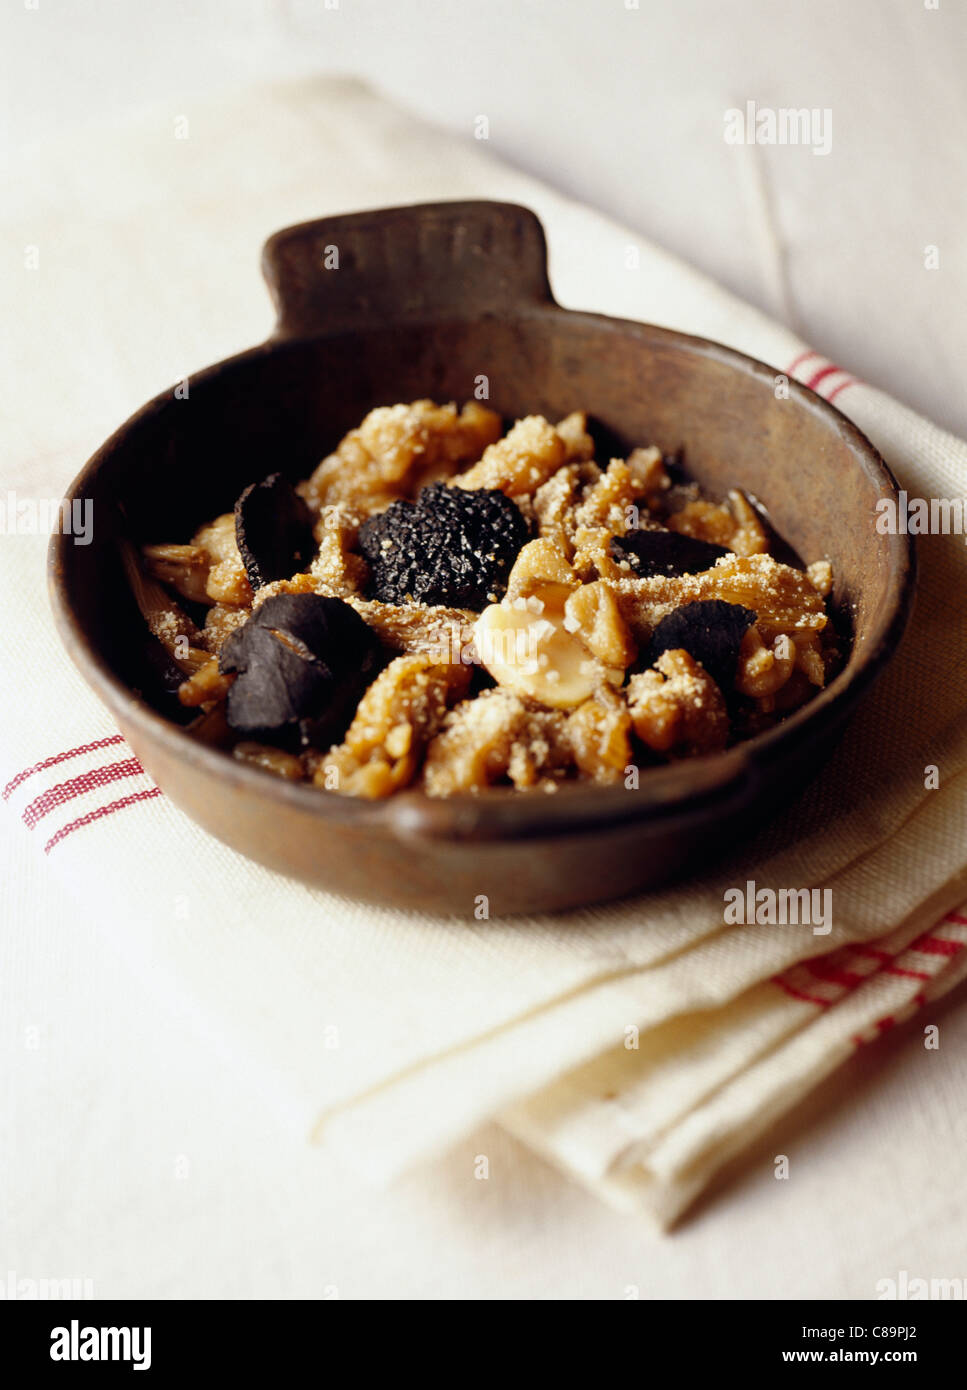 Chinese artichoke and cardoon gratin with marrow and truffles Stock Photo